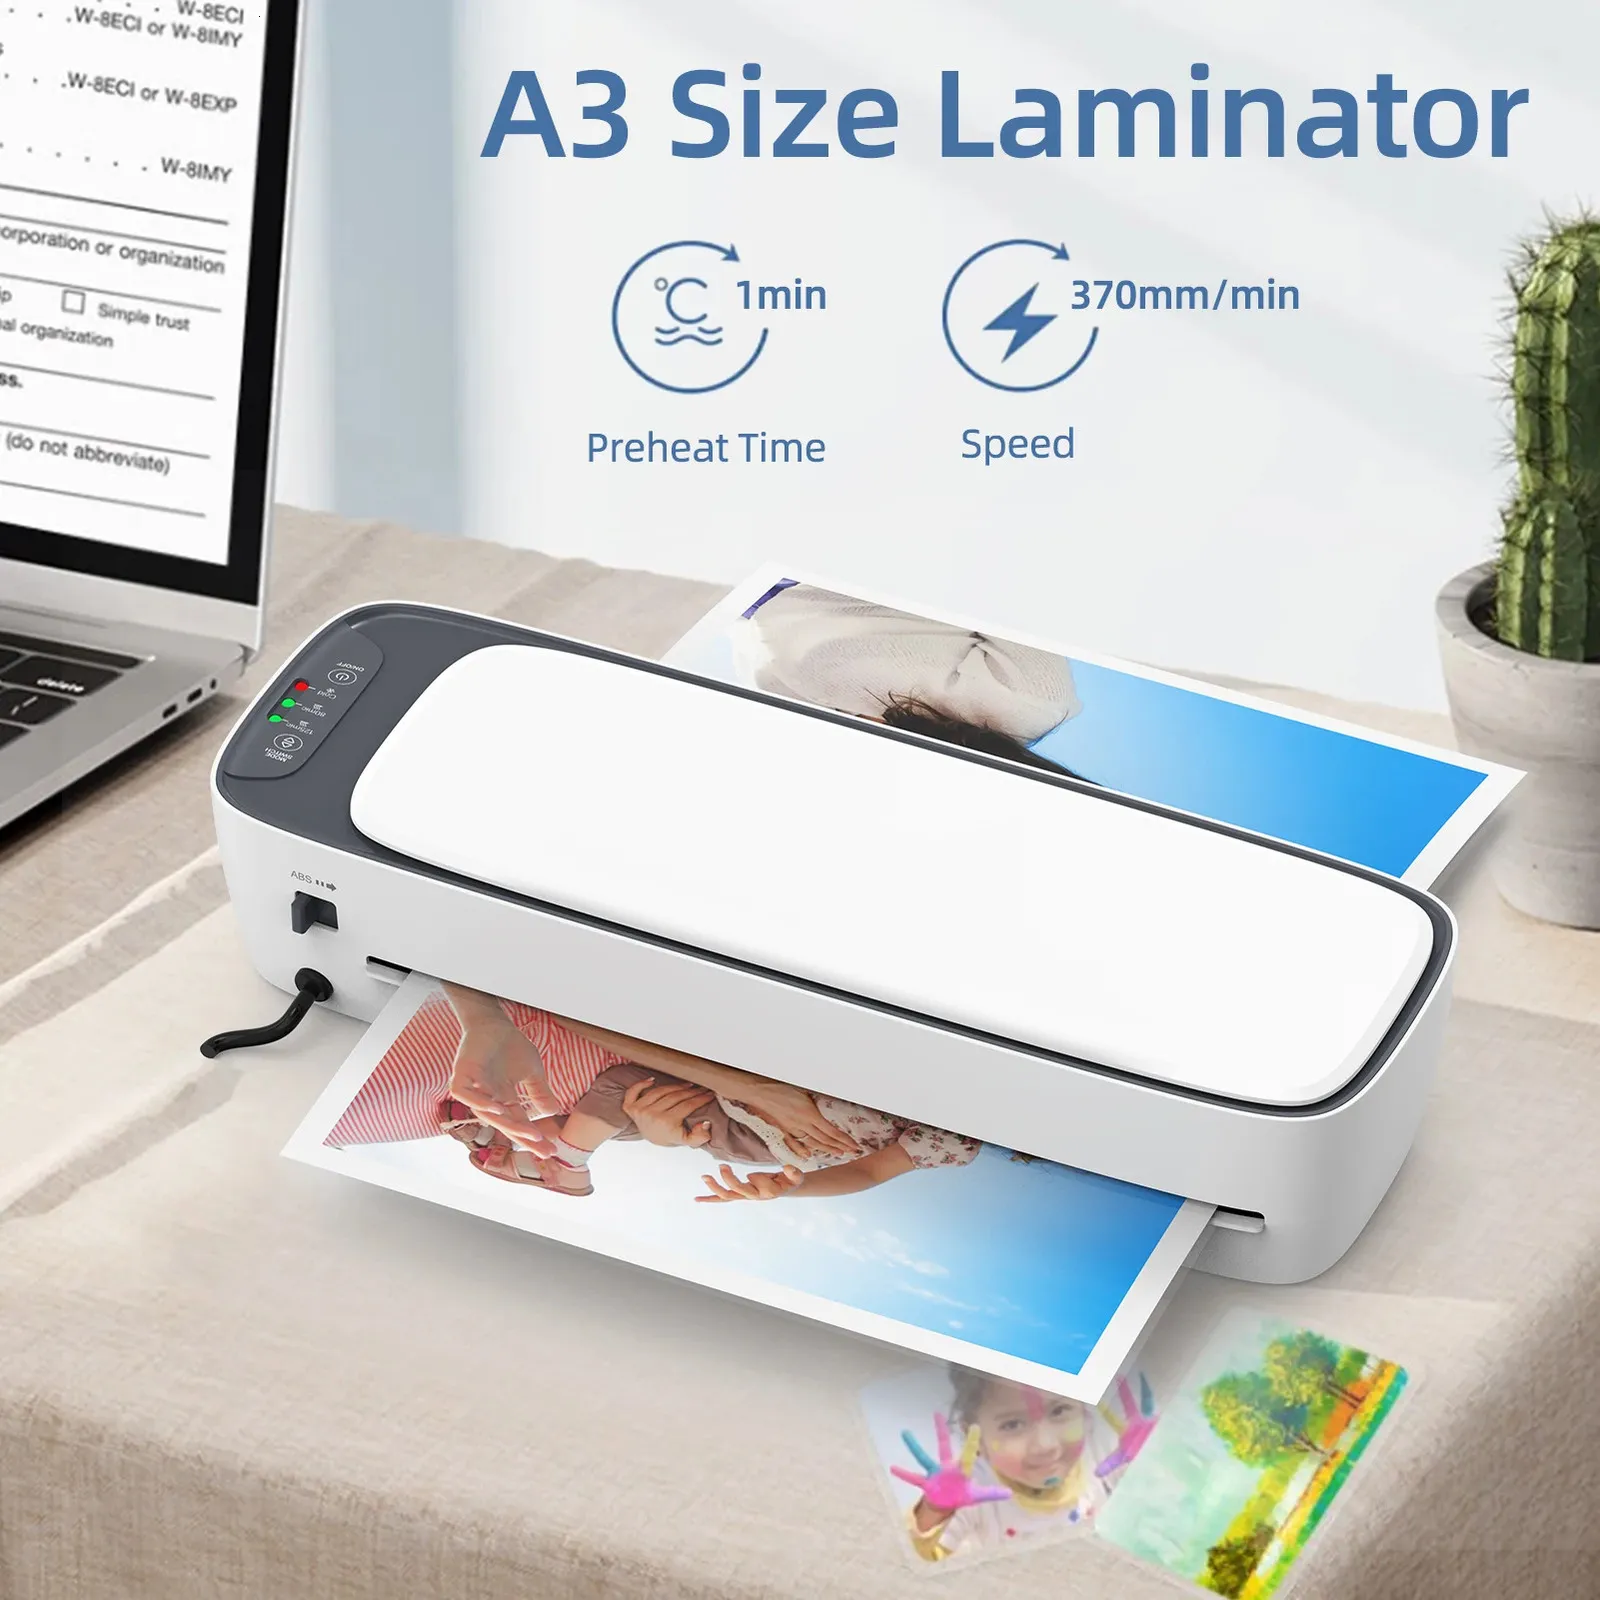 Desktop Laminator Machine Set A3 Size Multifunctional and Cold Lamination 2 Roller System 125 inches Max Width with Paper 240102